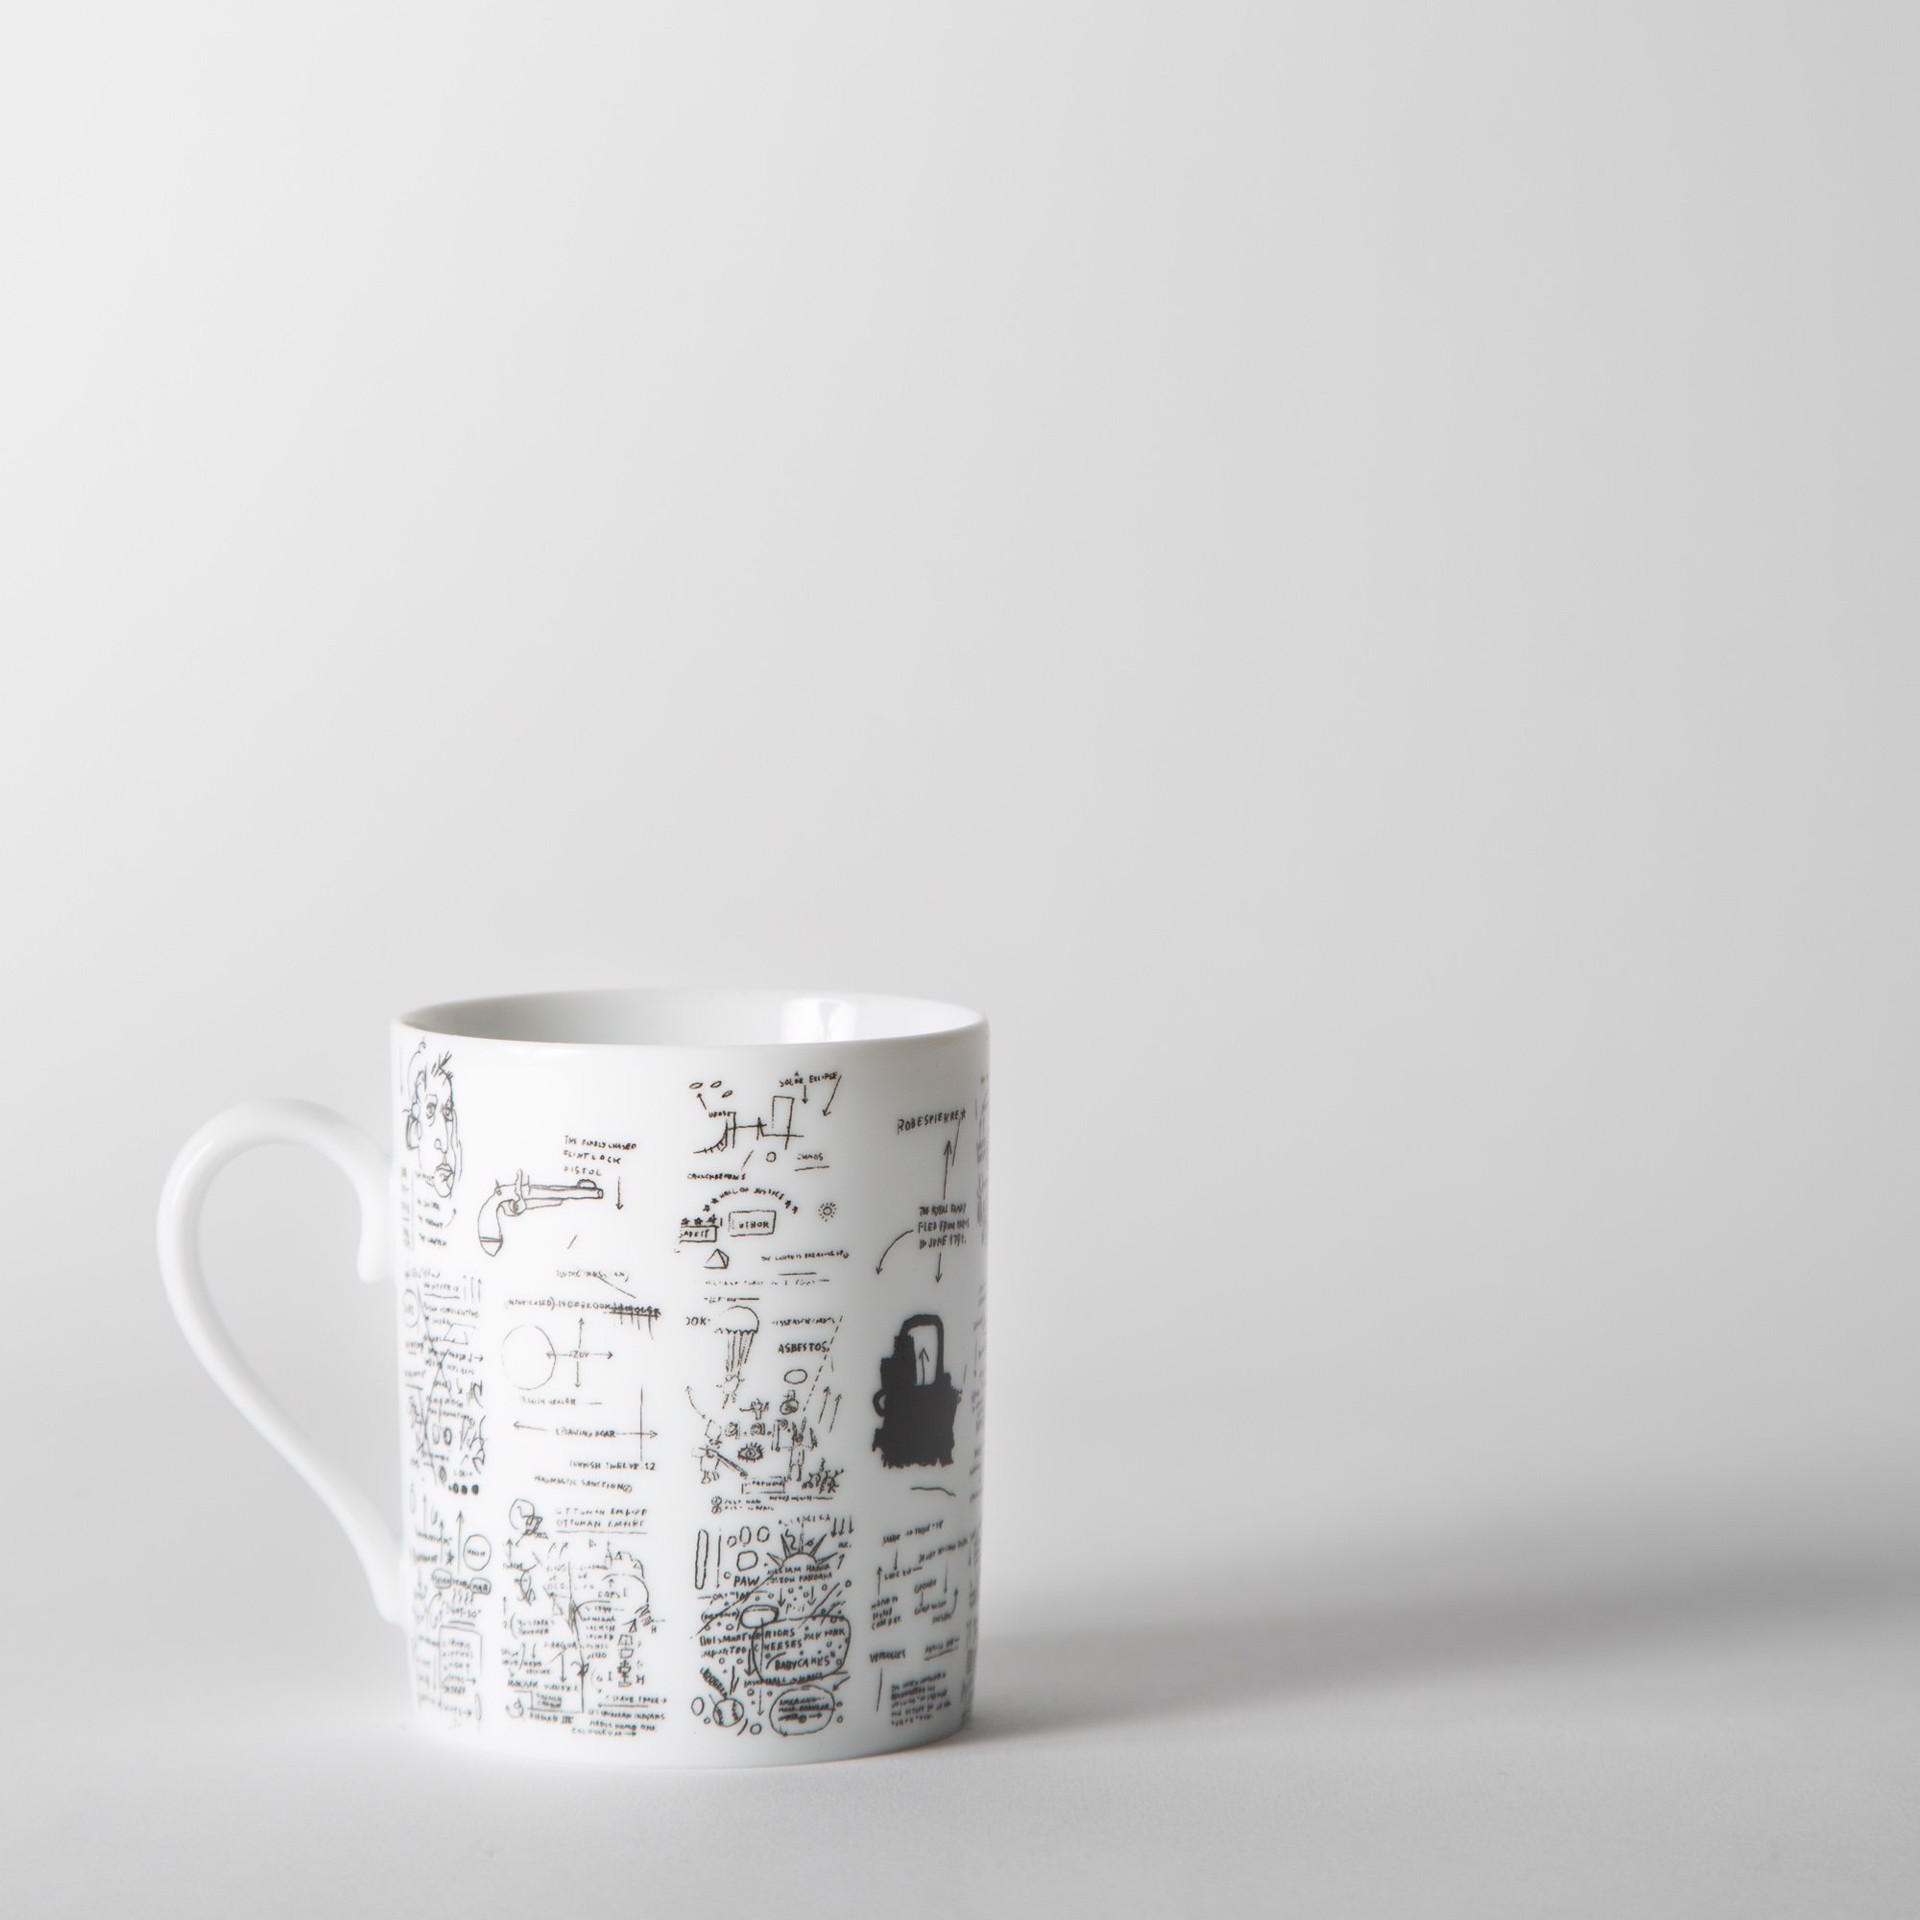 Return Of the Central Figure Mug by Jean-Michel Basquiat